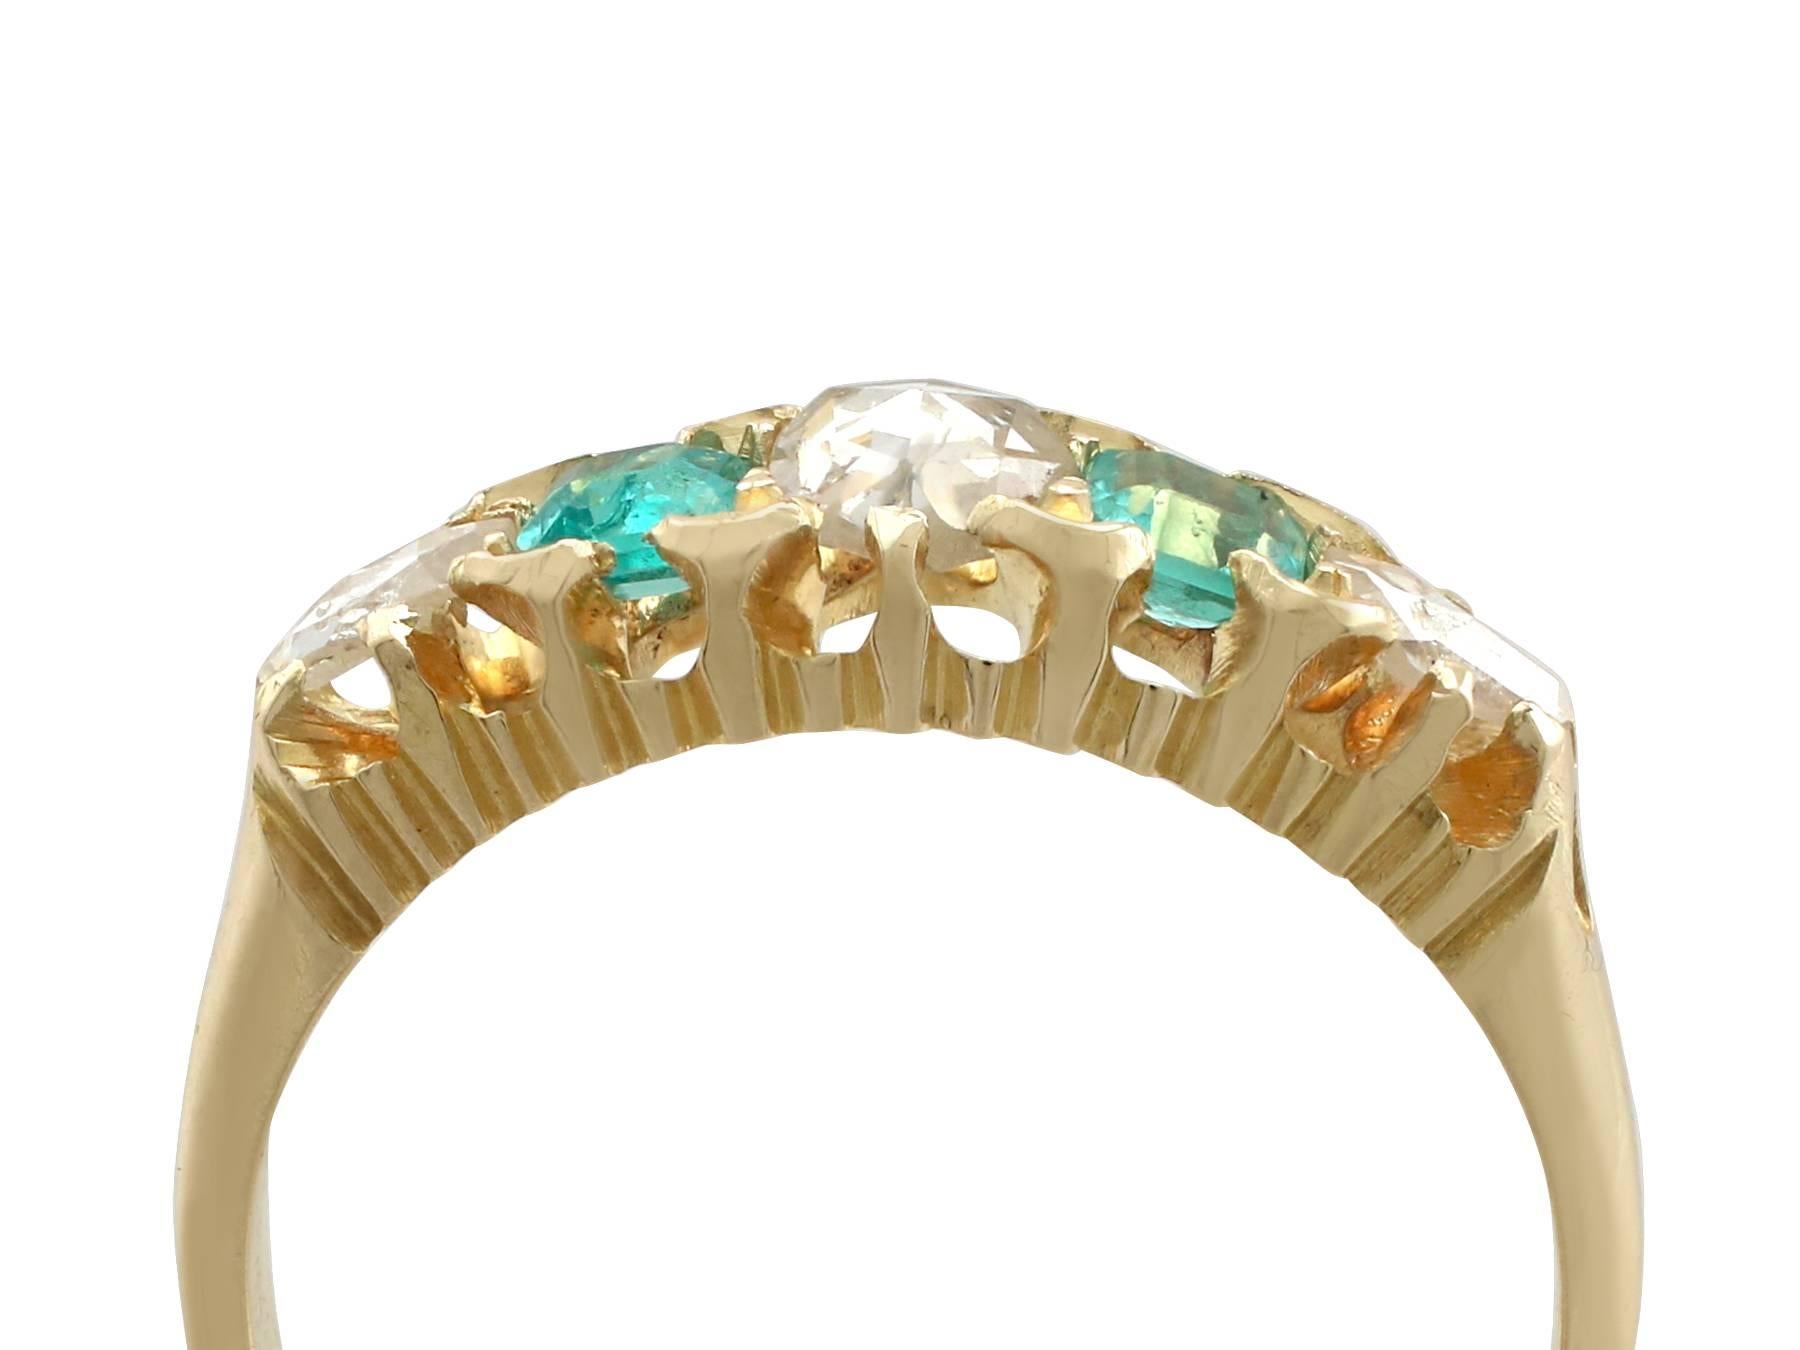 An impressive Victorian 0.55 carat diamond and 0.42 carat emerald, 18 carat yellow gold five stone cocktail ring; part of our diverse antique jewellery collections.

This fine and impressive Victorian emerald and diamond ring has been crafted in 18